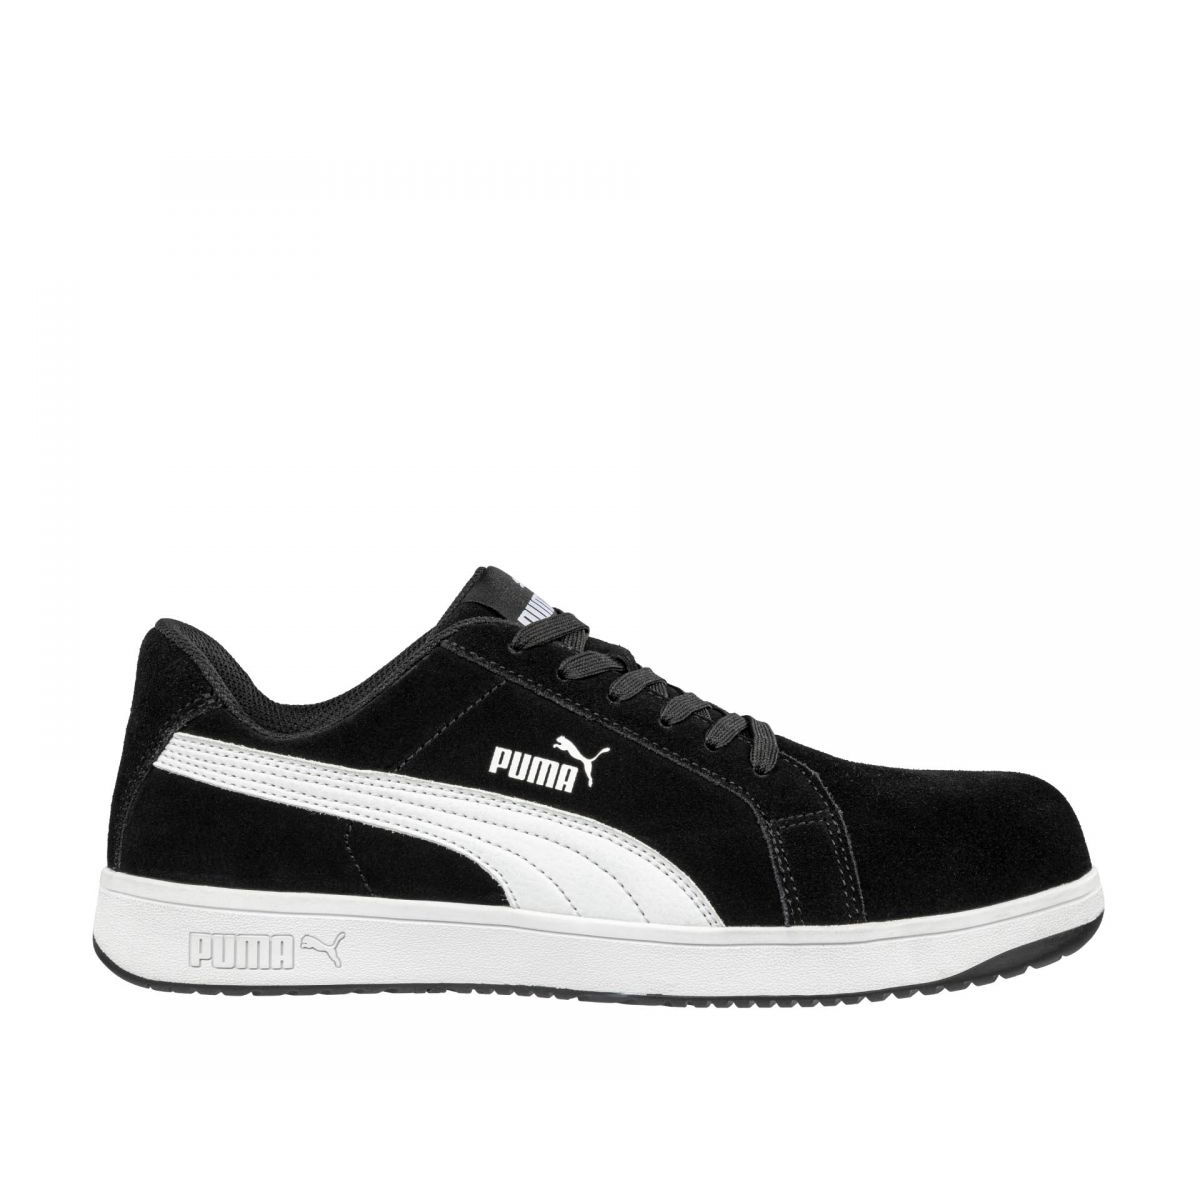 PUMA Safety Men's Iconic Low Composite Toe EH Work Shoes Black Suede - 640015 ONE SIZE BLACK - BLACK, 9